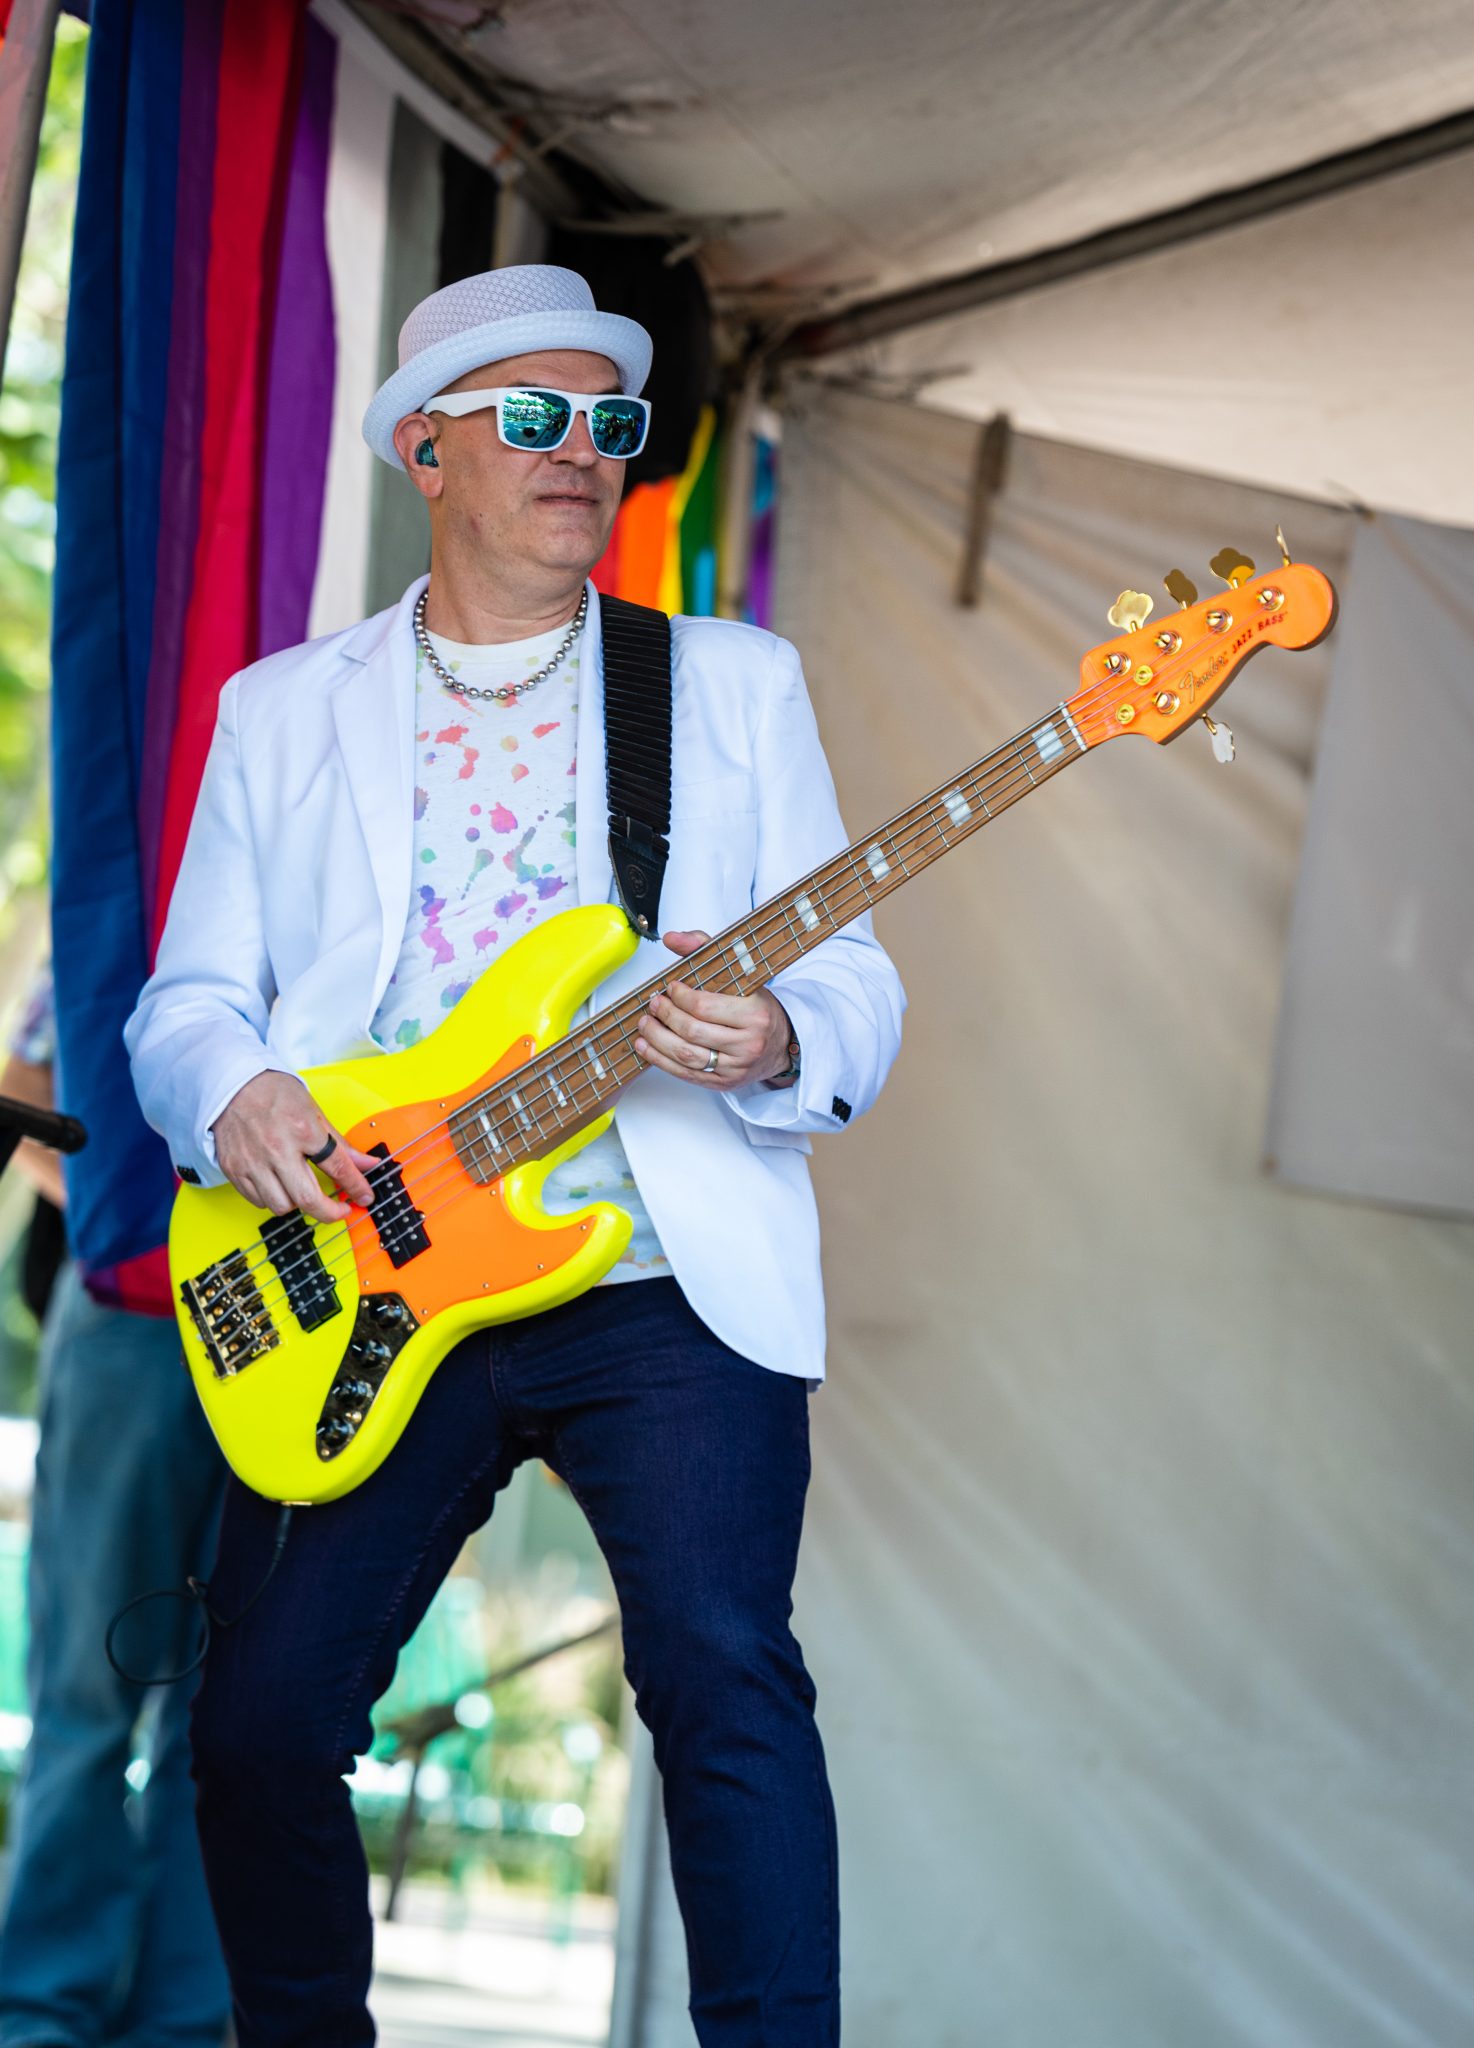 Tainted Love, bass player, 1980's cover band, orange and yellow, davis pride, davis, california, pride month, gay community, event, chris allan, freelance photojournalist, news photography, lgbtq, event, colorful